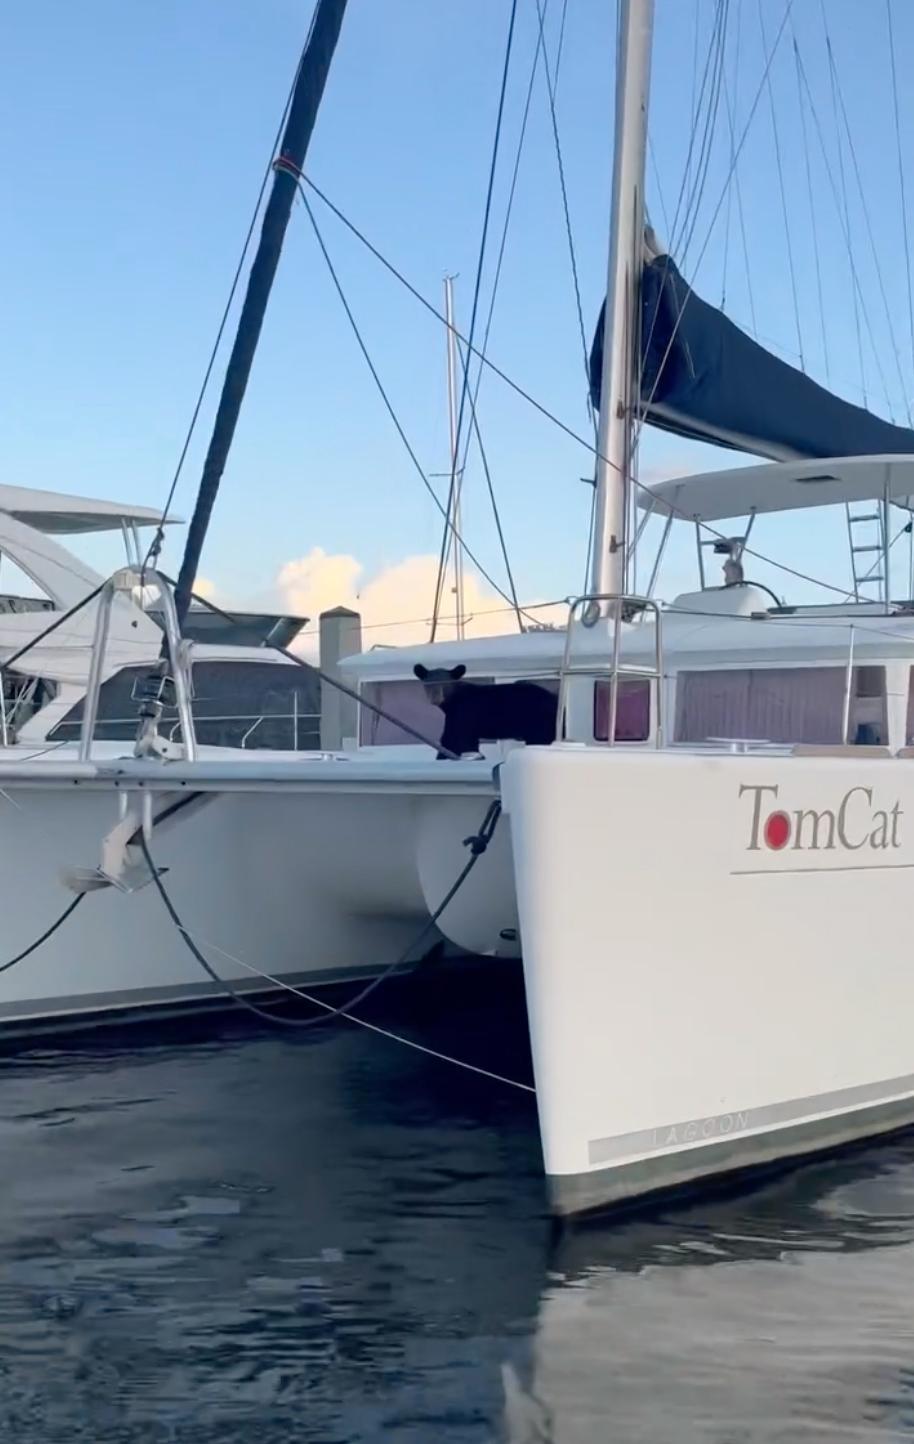 Screenshot from a video of a black bear on a 50-foot catamaran named "TomCat," which was docked at the Naples Sailing and Yacht Club. (Courtesy of TowBoat US Naples and Marco Island)